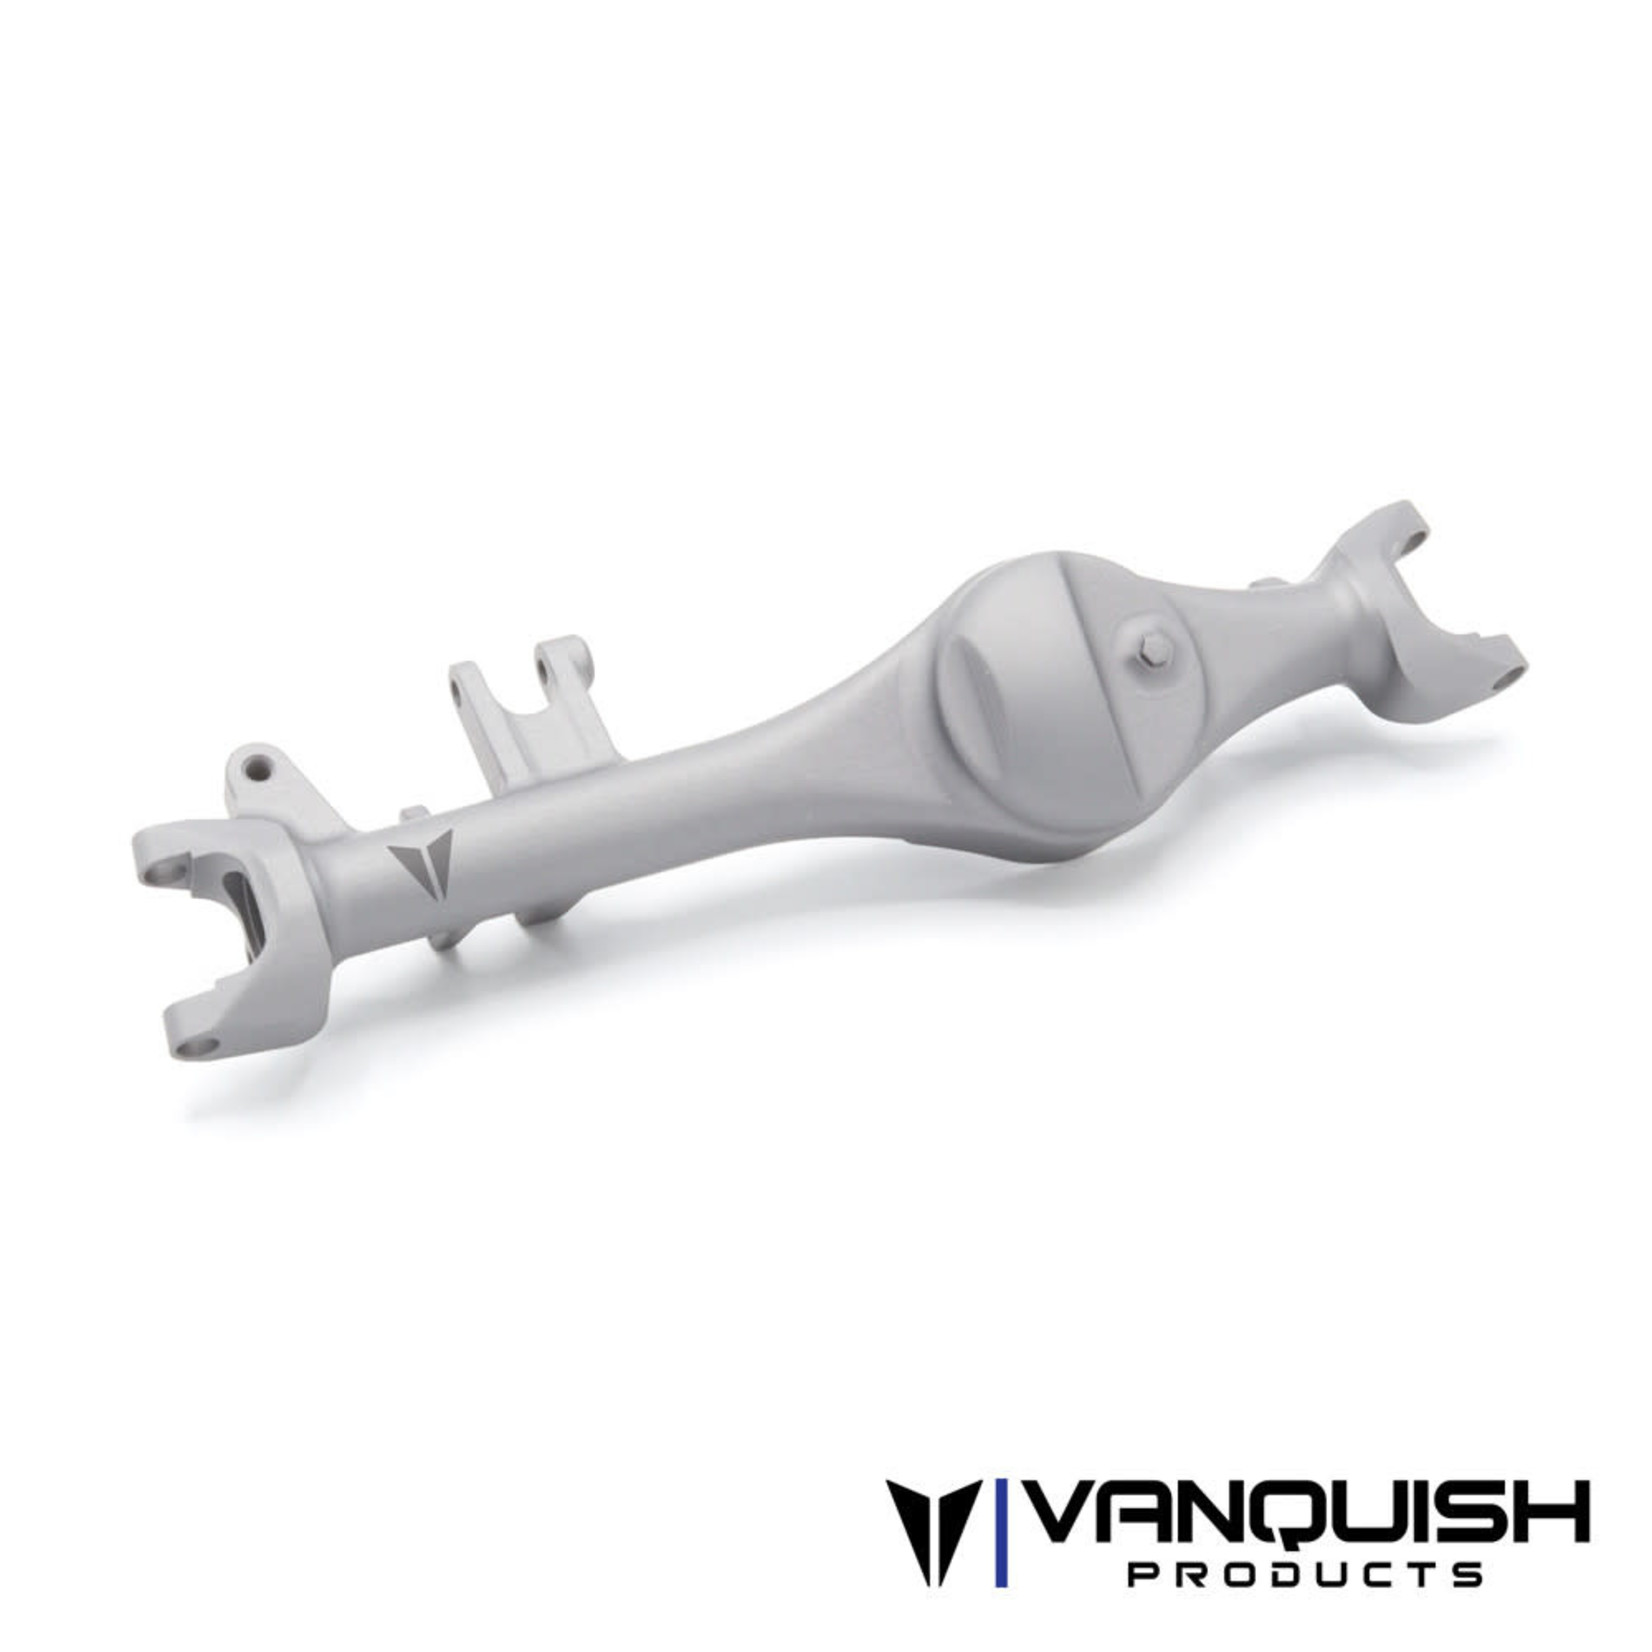 Vanquish Products Vanquish Products F10T Aluminum Front Axle Housing - Clear Anodized #VPS08631